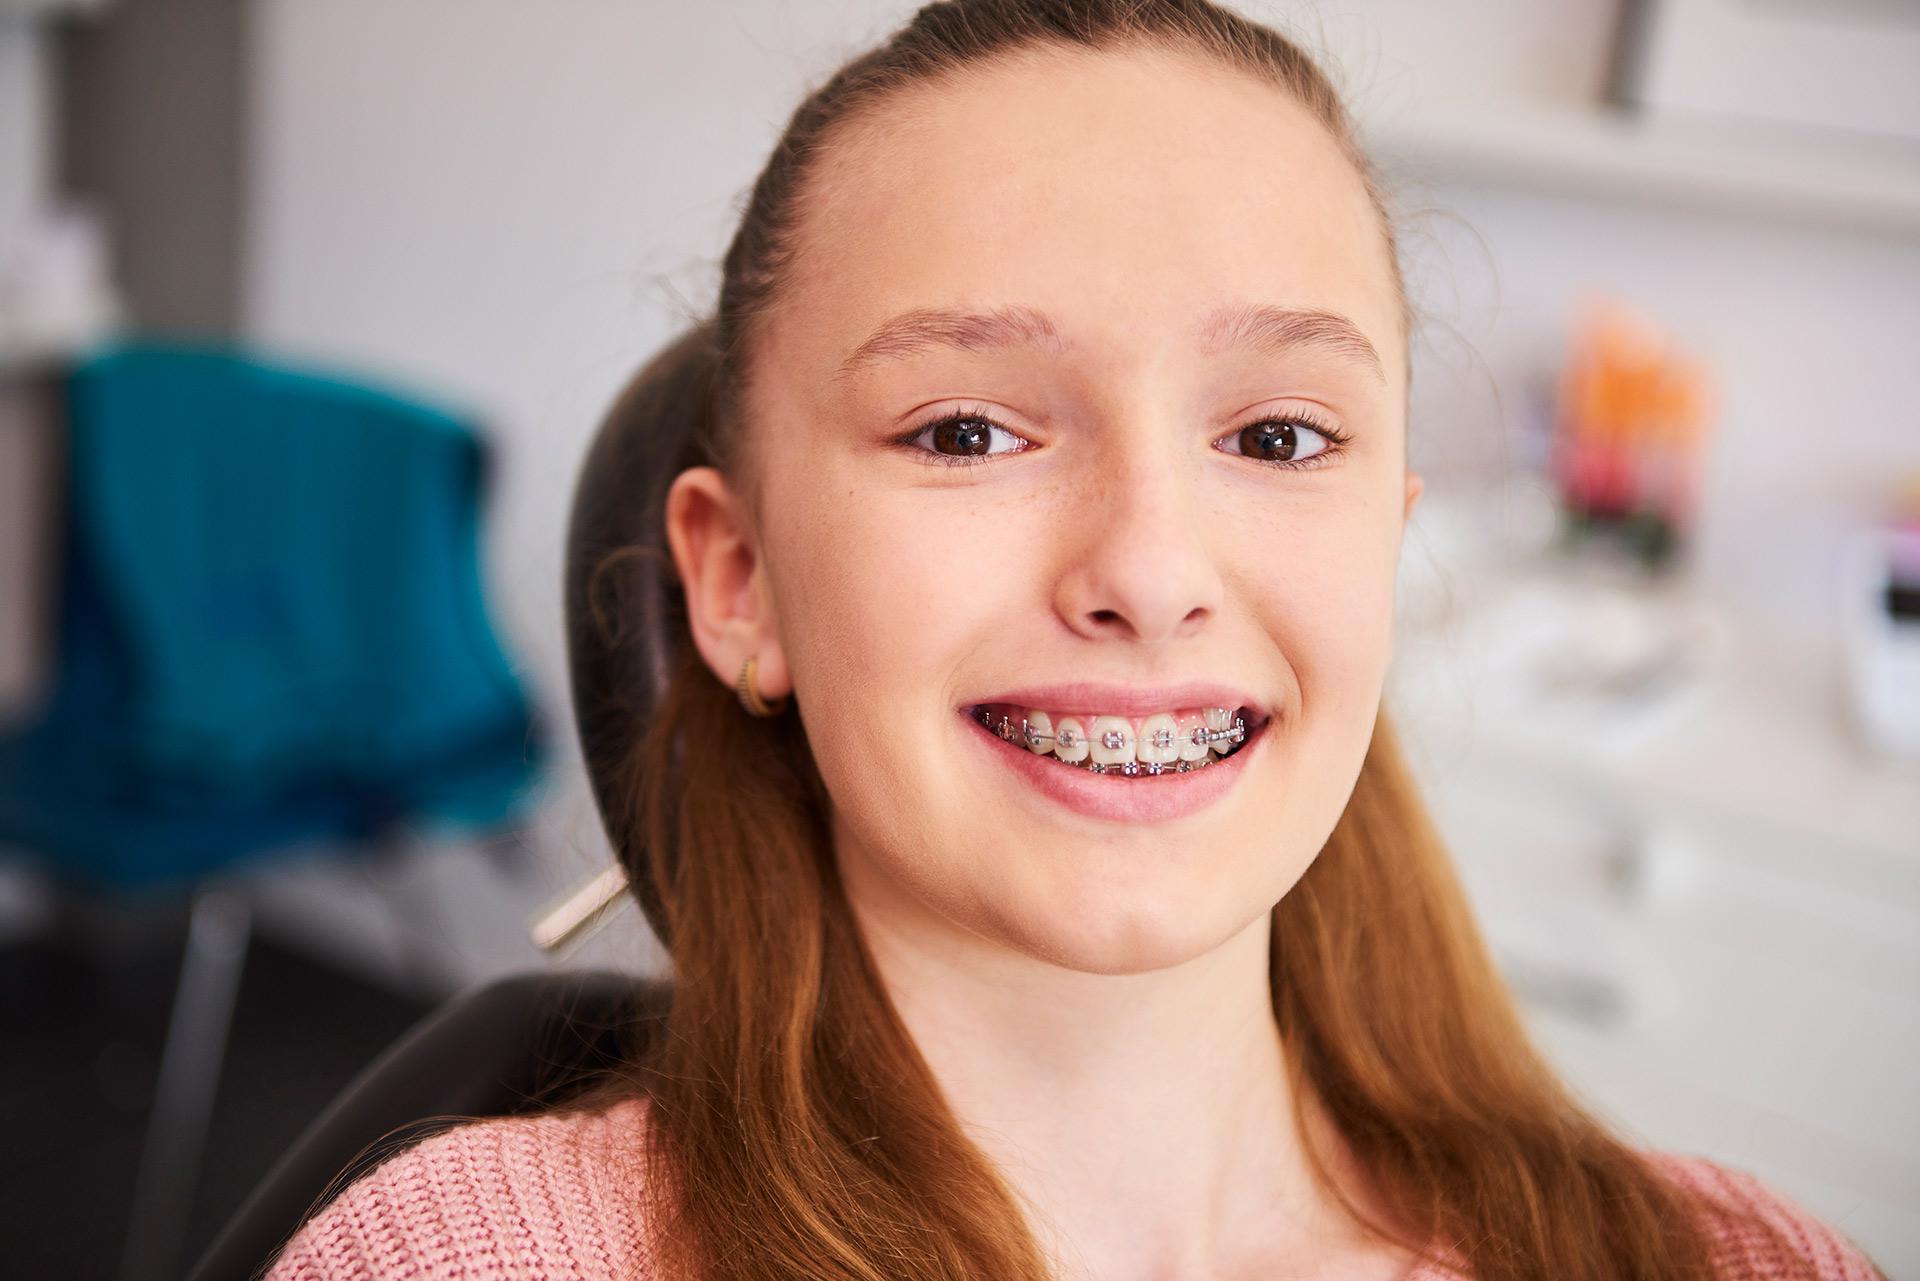 Young girl from Downtown Los Angeles at an appointment for her braces